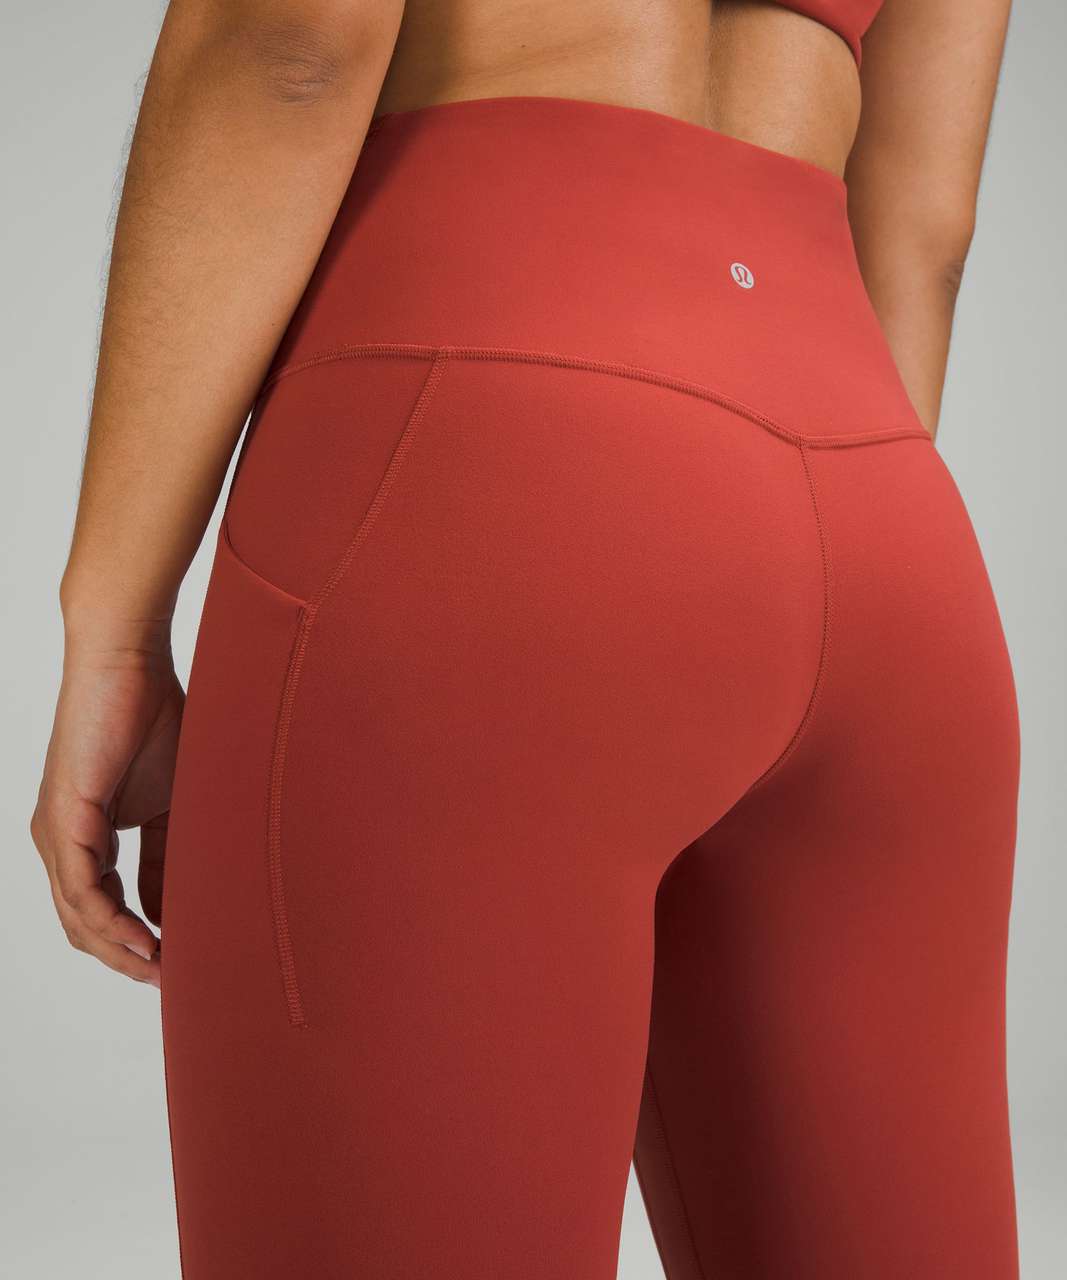 Lululemon Align High-Rise Pant with Pockets 25" - Cayenne